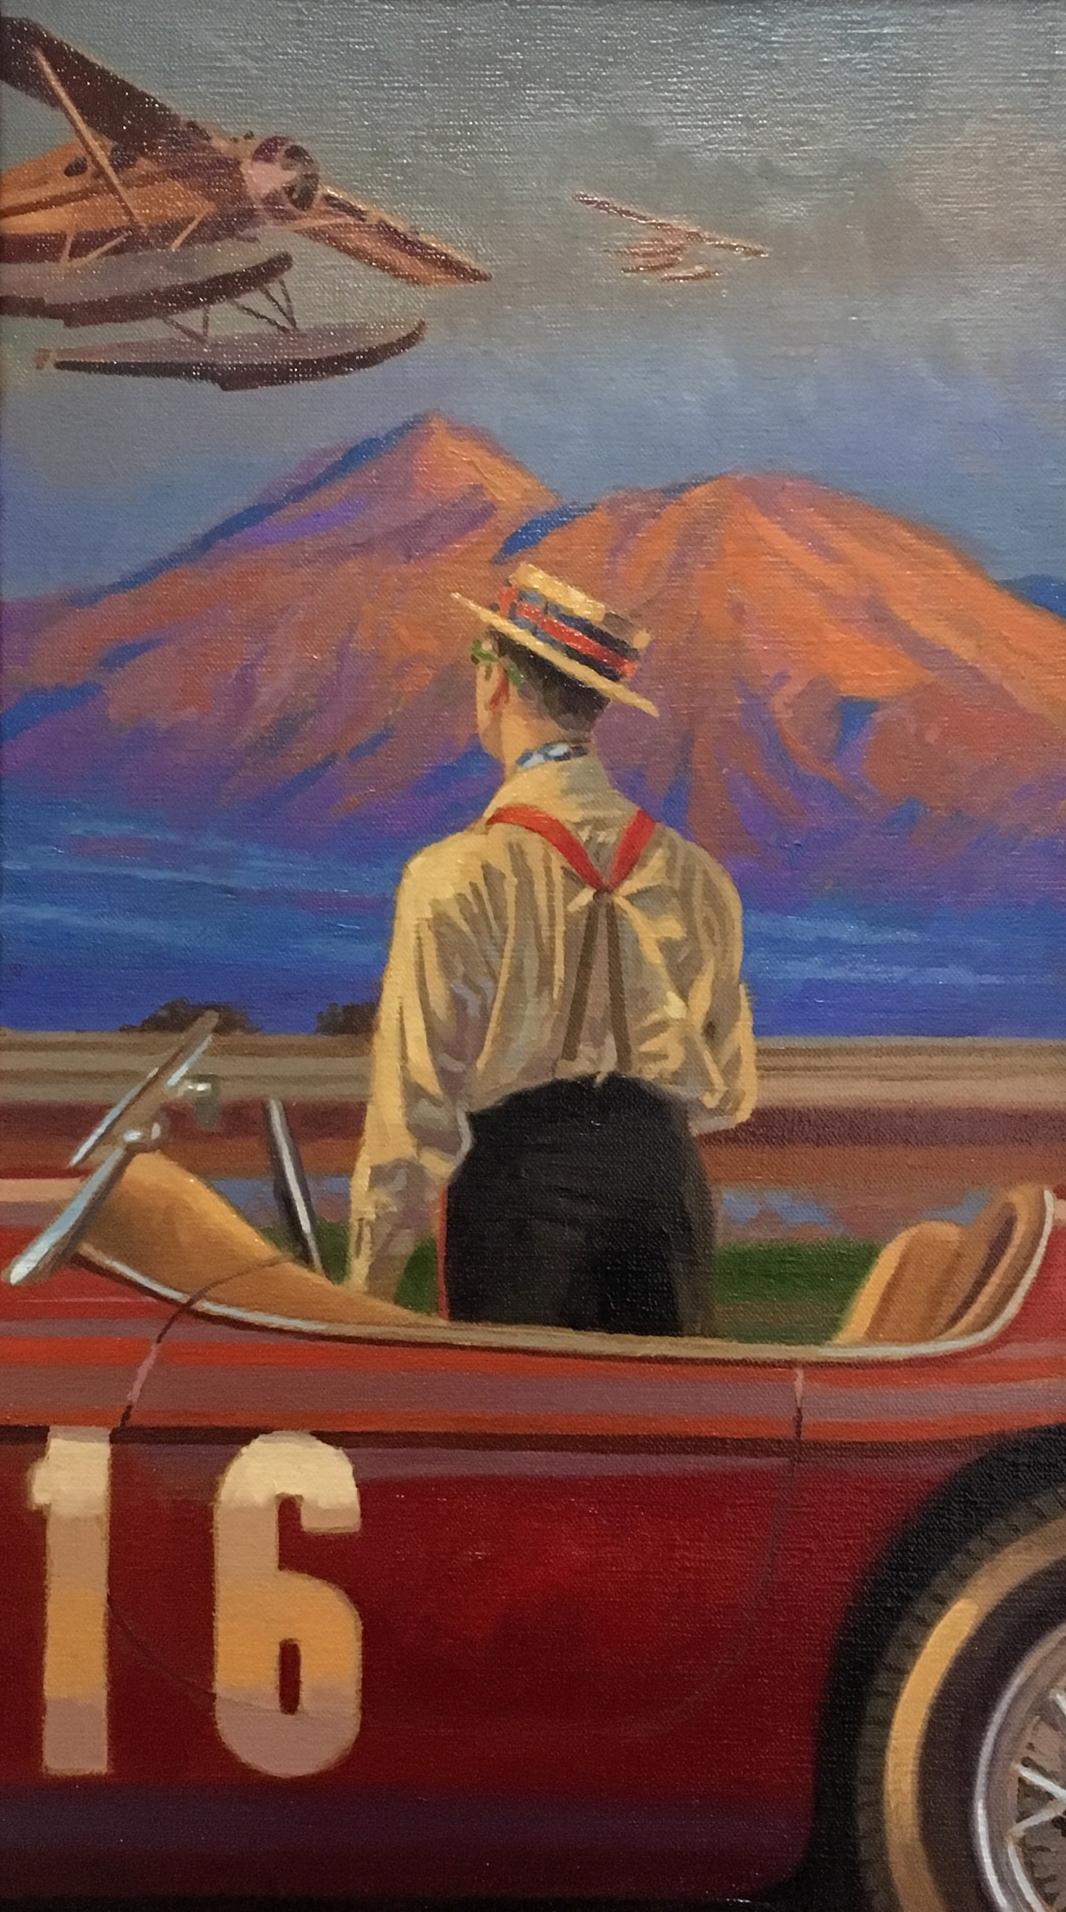 Peregrine Heathcote Figurative Painting - "Air Race" ”  Fulfill your fantasy of high-speed air racing 